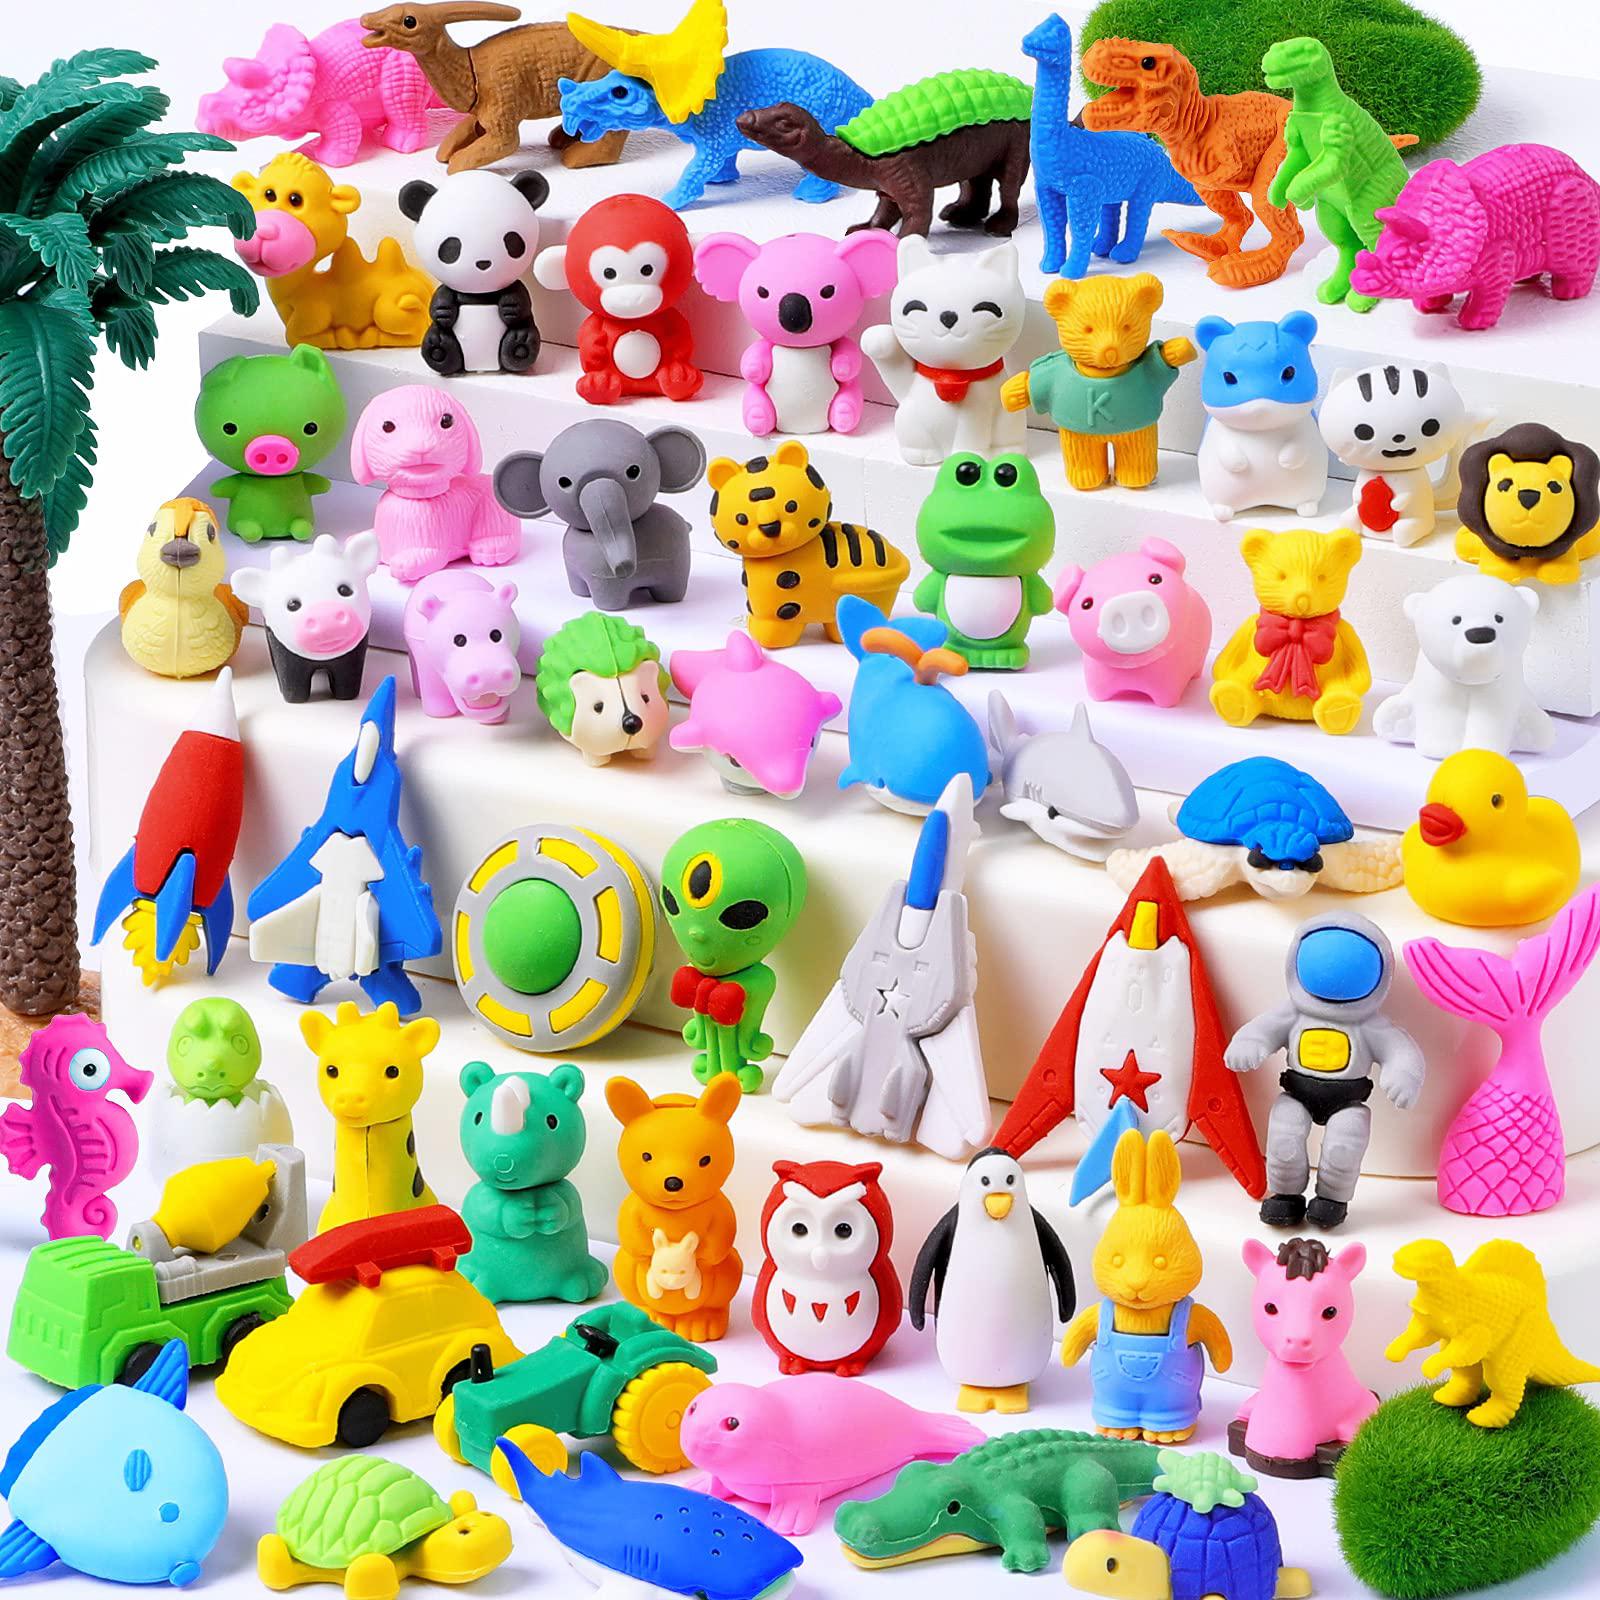 witalent 60 pcs animal erasers for kids pencil erasers puzzle erasers take apart erasers mini erasers treasure box toys for c